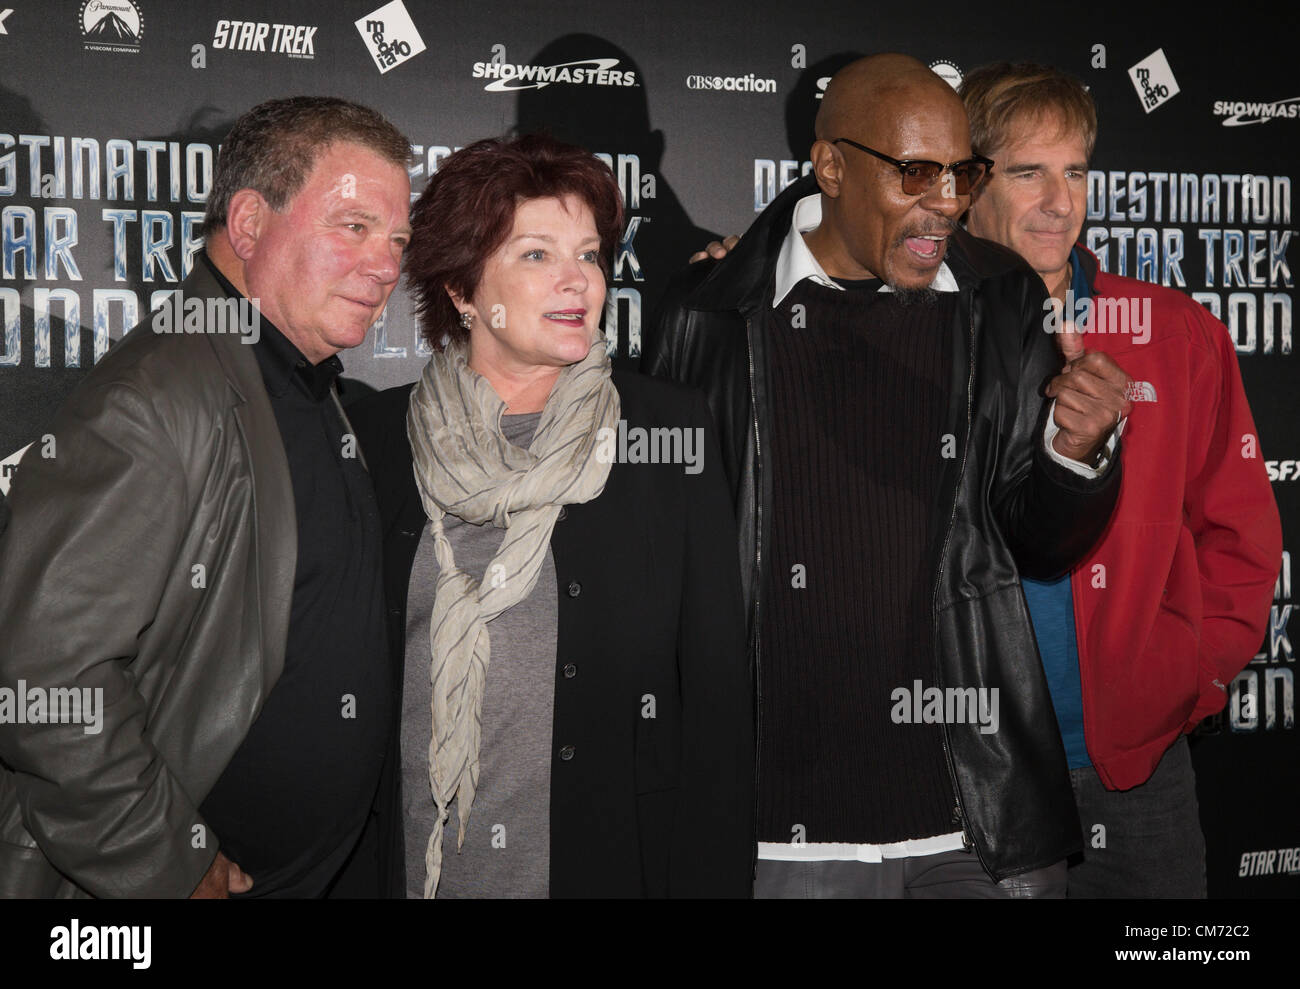 London, England, UK. Friday, 19 October 2012. Photocall with four of the five captains of the Star Trek series (L-R) William Shatner (original series), Kate Mulgrew (Voyager), Avery Brooks (Deep Space Nine) and Scott Bakula (Enterprise) at Destination Star Trek. Sir Patrick Stewart who played Captain Jean-Luc Picard in The Next Generation refused to join his fellow actors for the photocall although he was standing only yards away.The Convention takes place at the ExCel Exhibition Centre in East London from 19-21 October 2012. Photo credit: Nick Savage/Alamy Live News Stock Photo